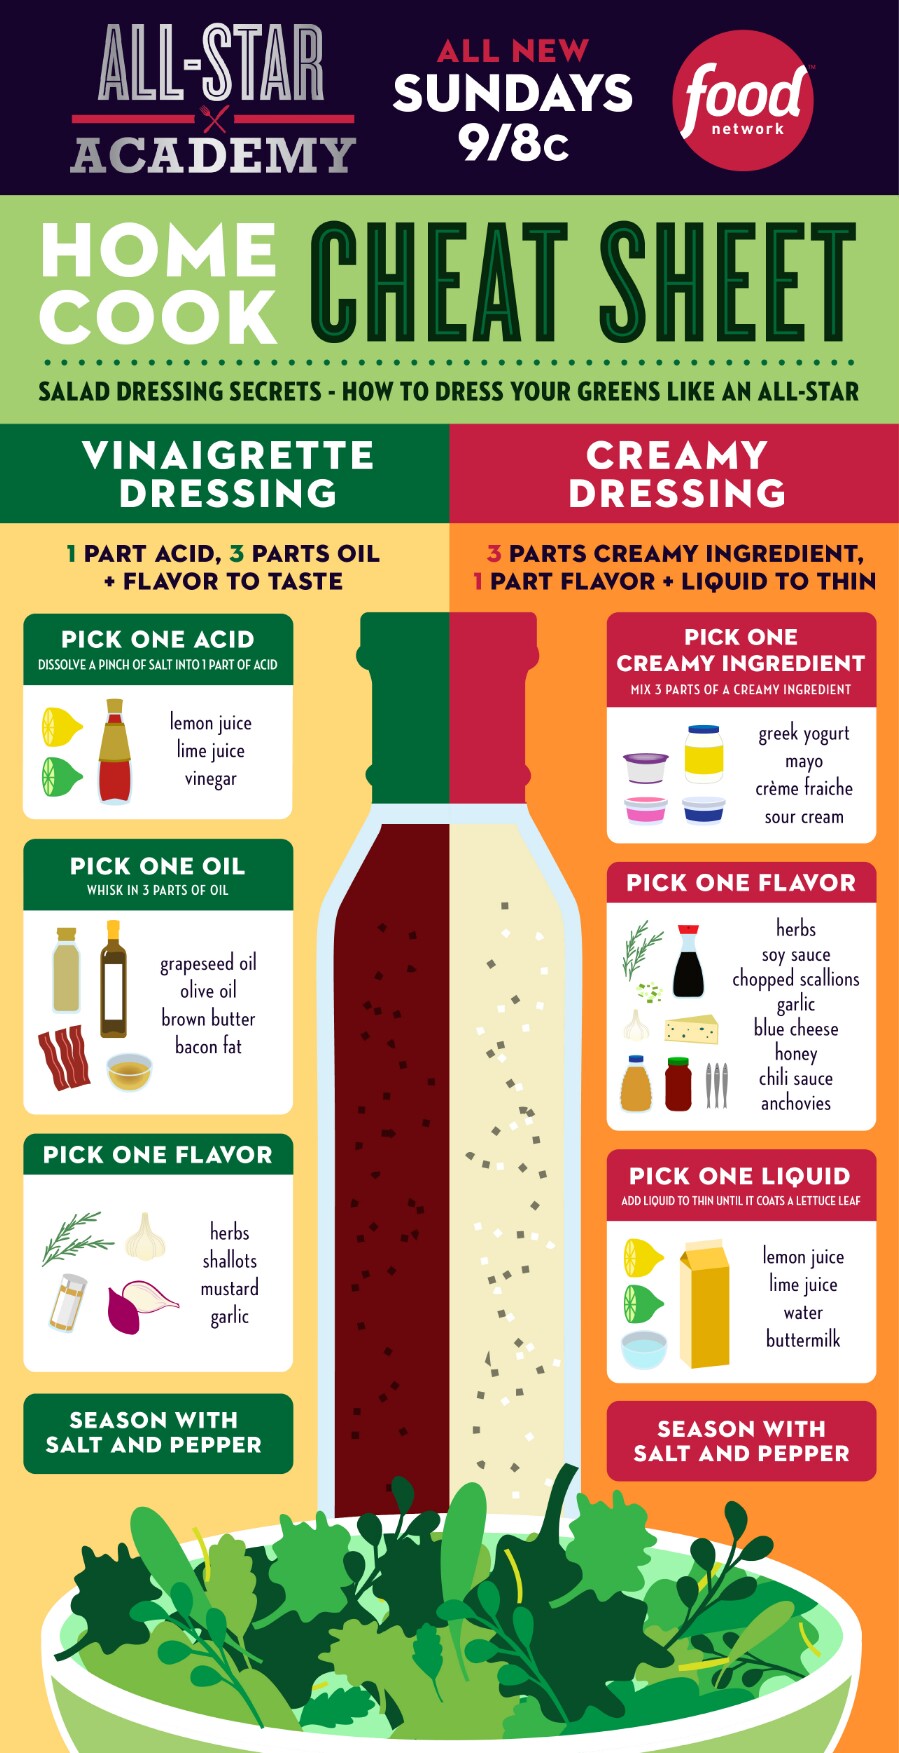 Make your own perfect customized salad dressing.